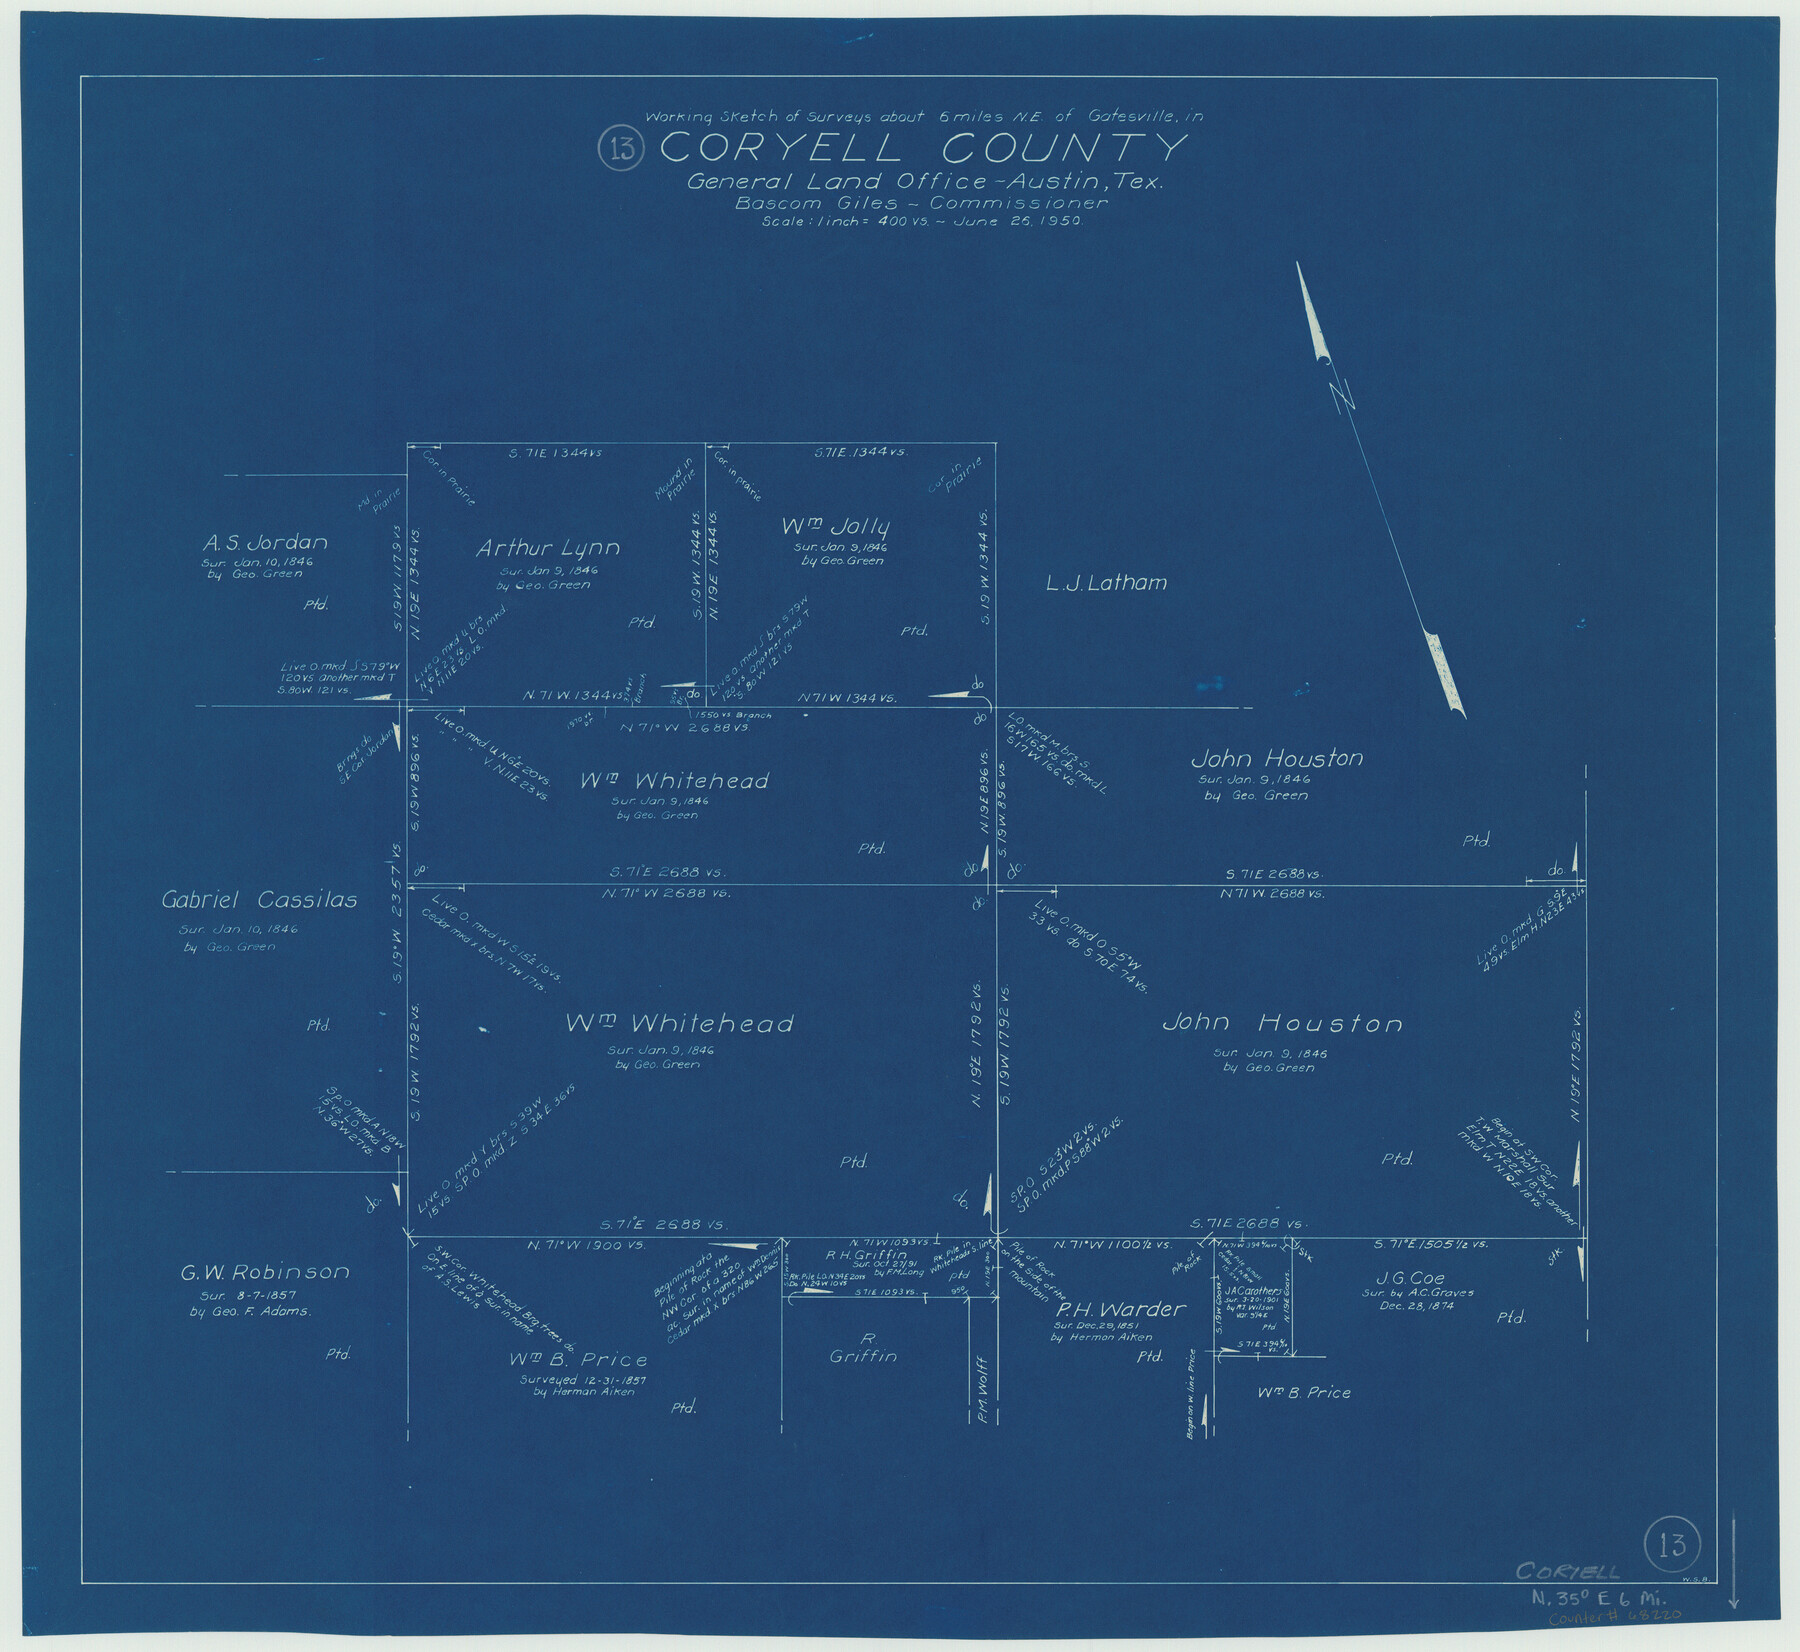 68220, Coryell County Working Sketch 13, General Map Collection